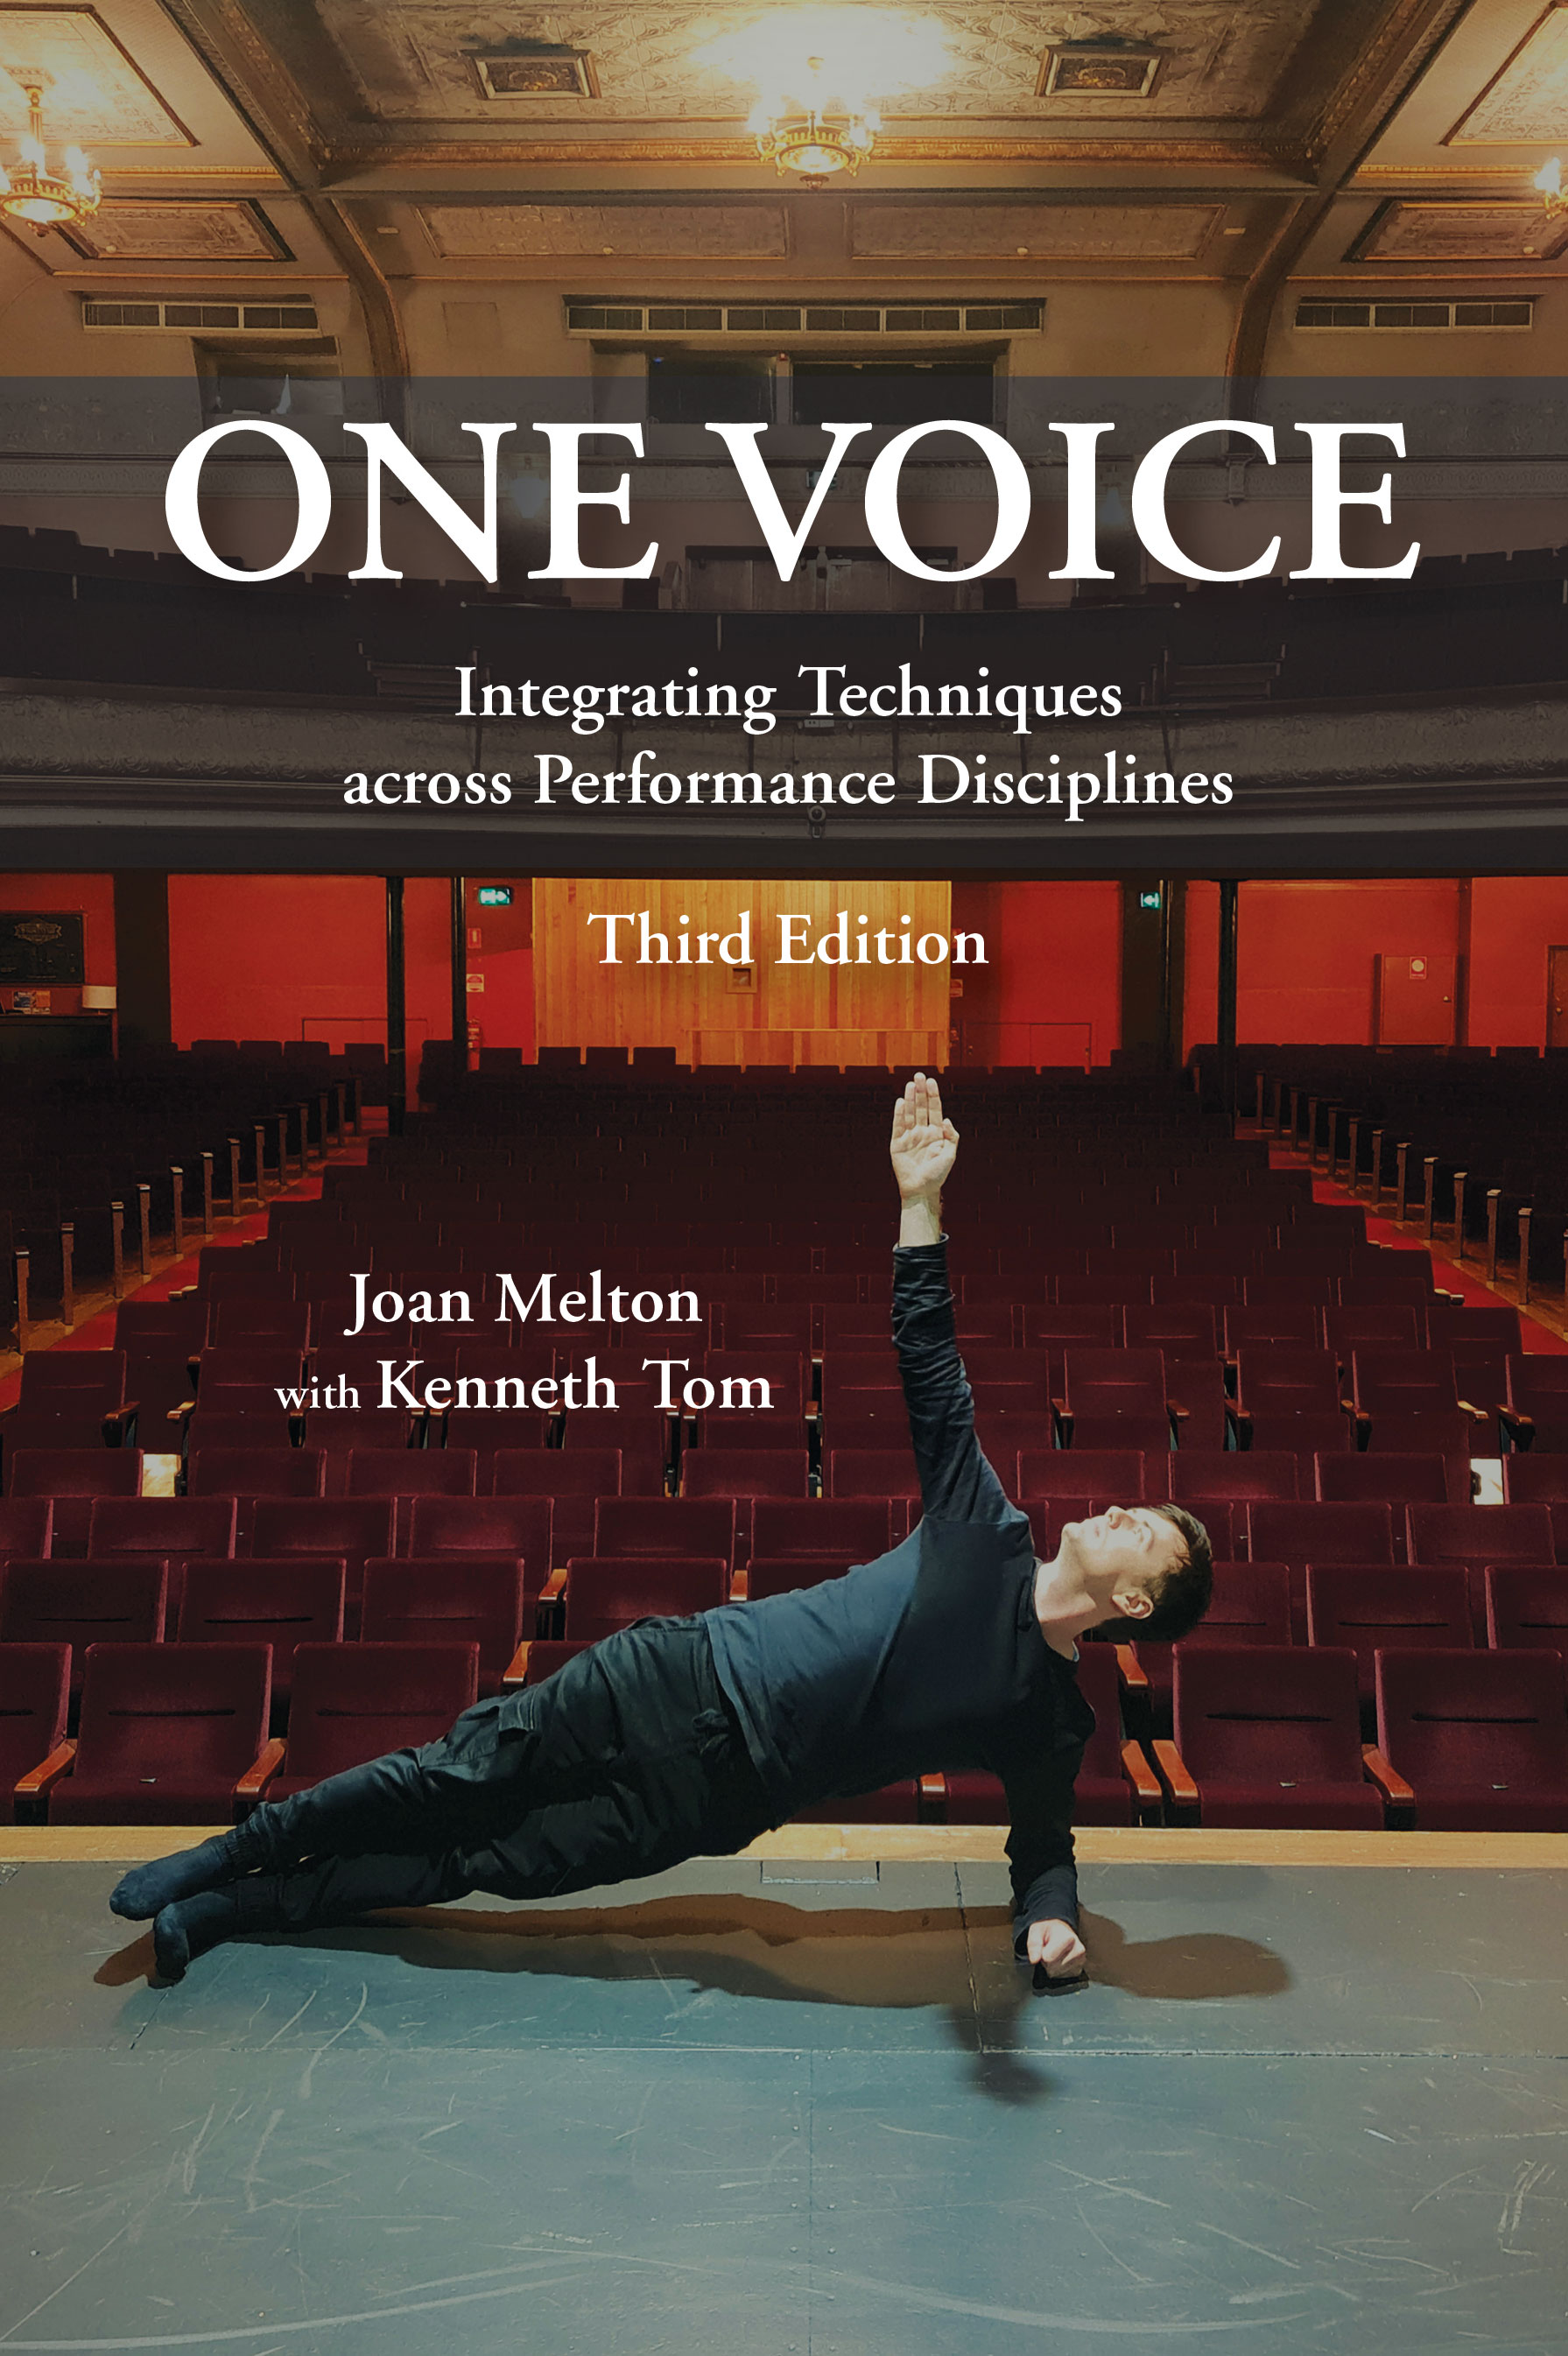 One Voice: Integrating Techniques across Performance Disciplines by Joan  Melton with Kenneth  Tom